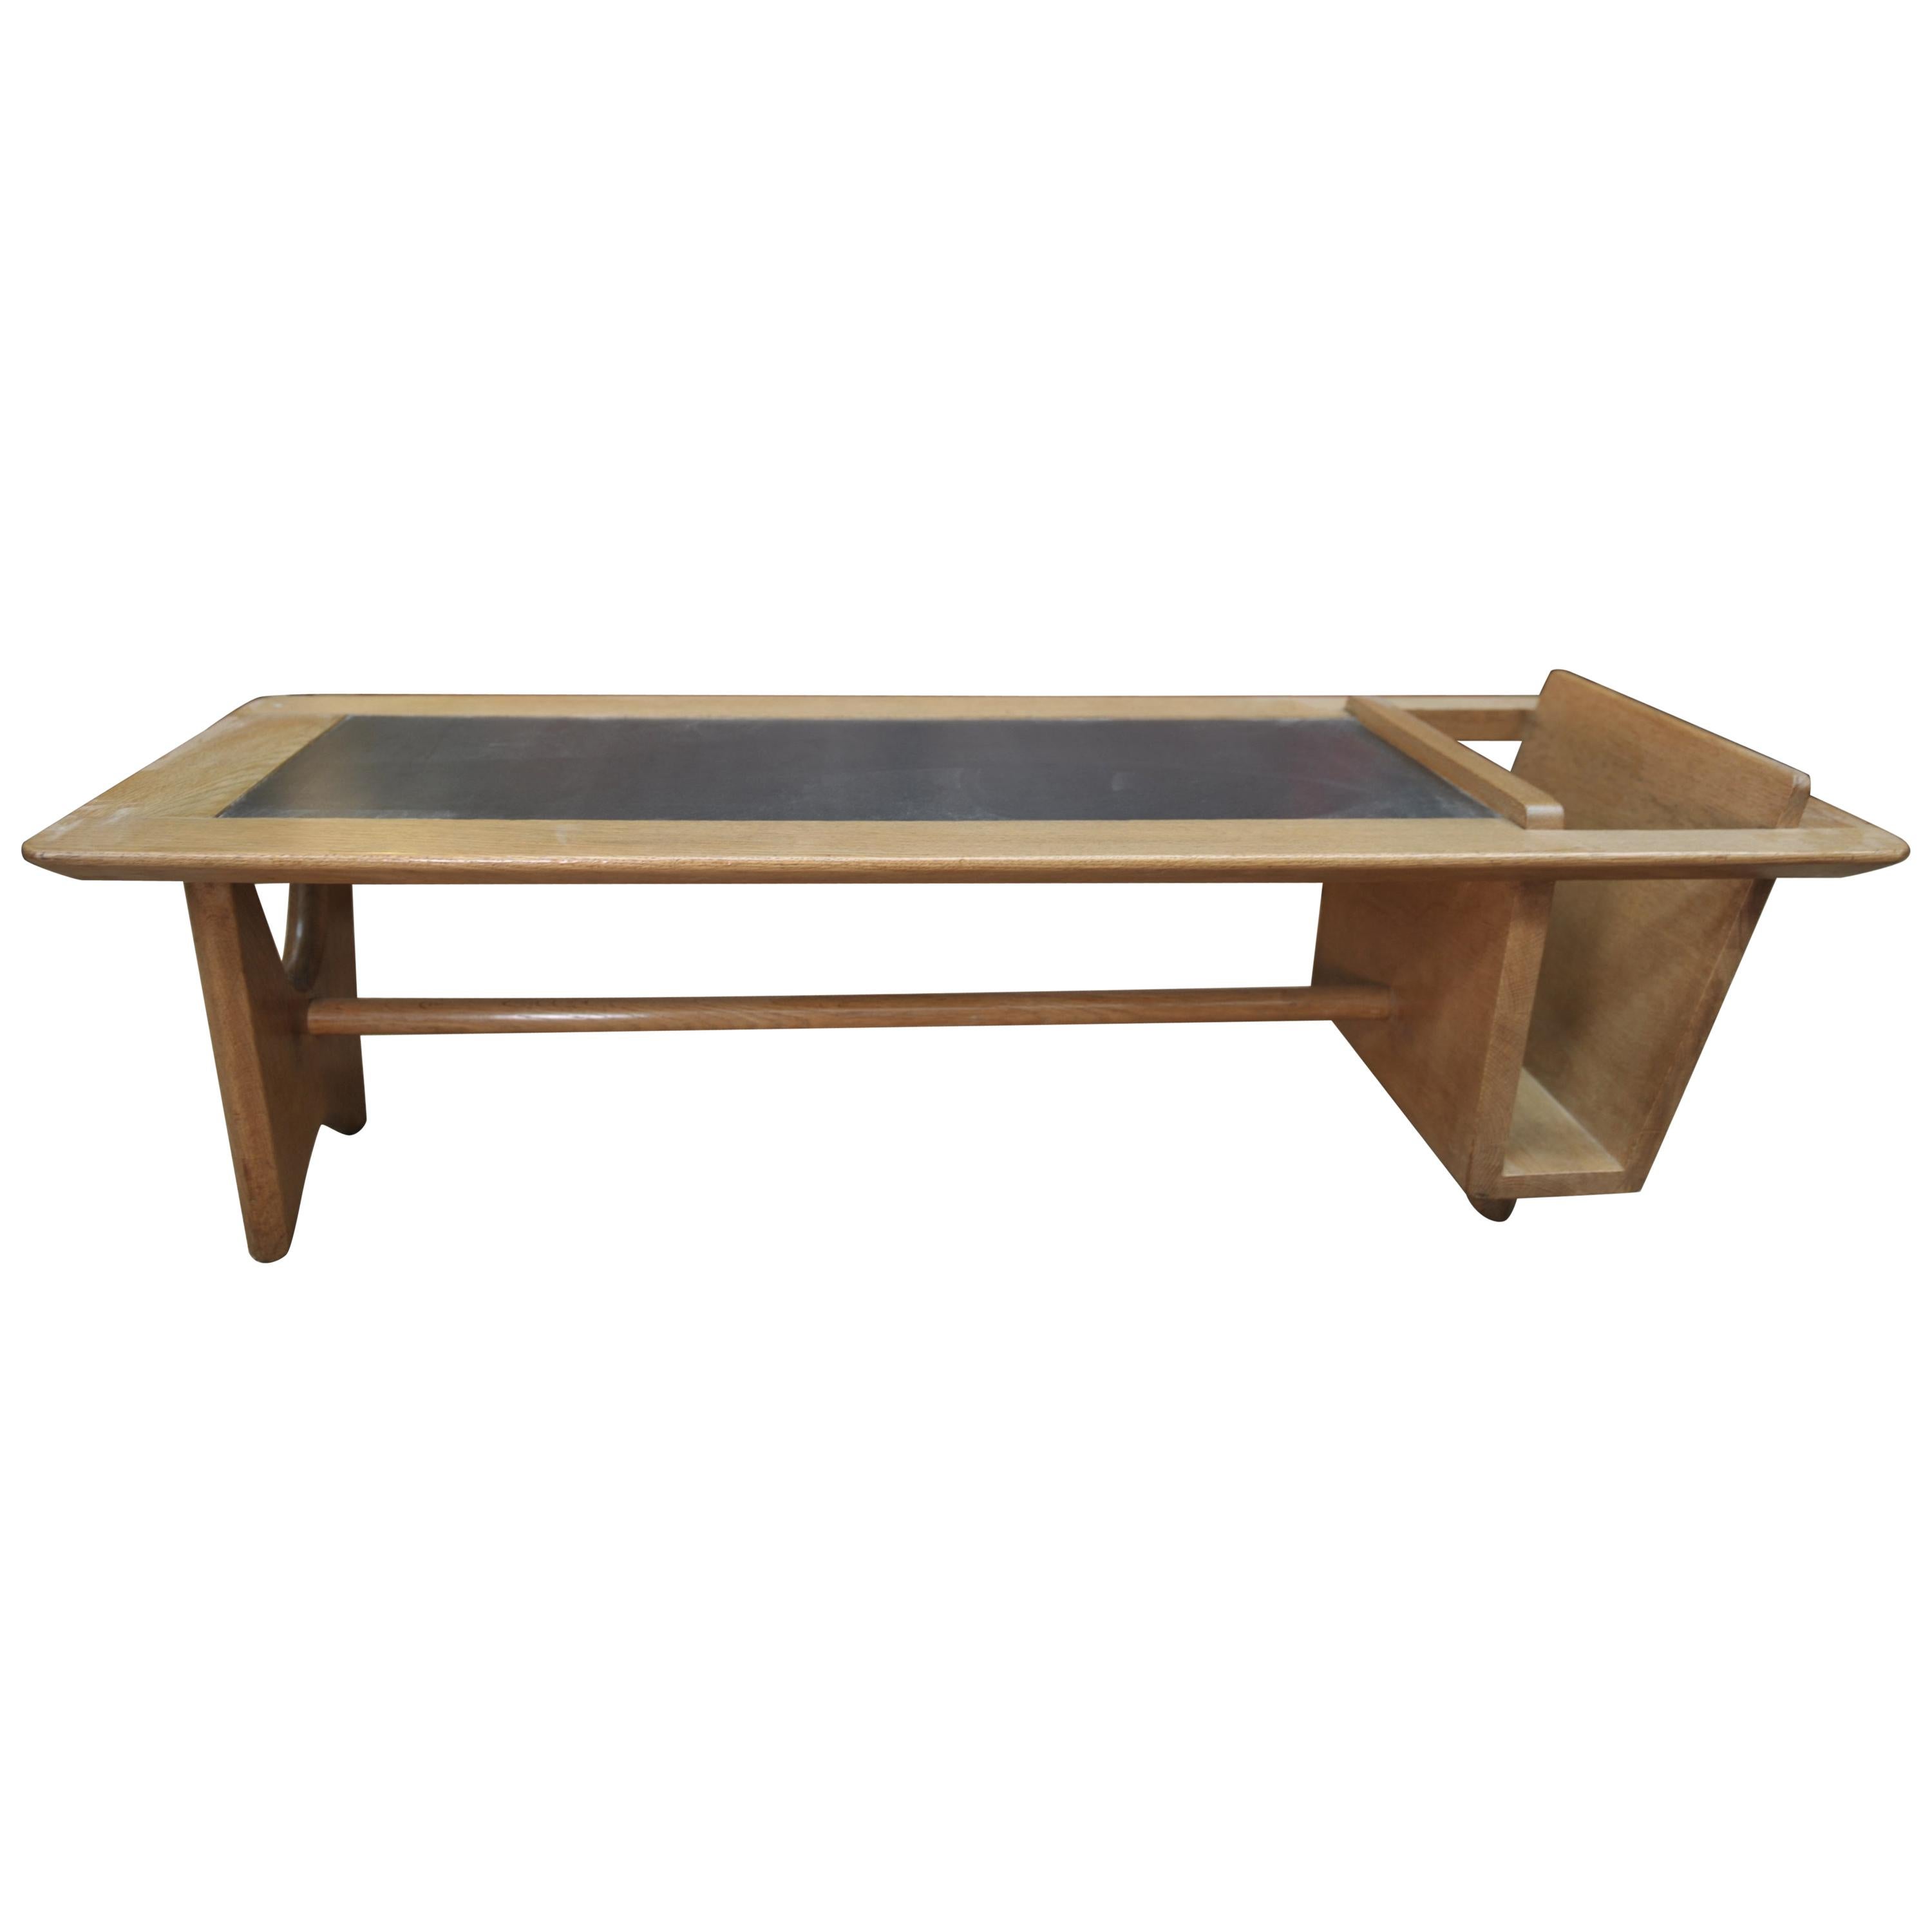 Midcentury Oak Coffee Table by Guillerme & Chambron for Votre Maison For Sale